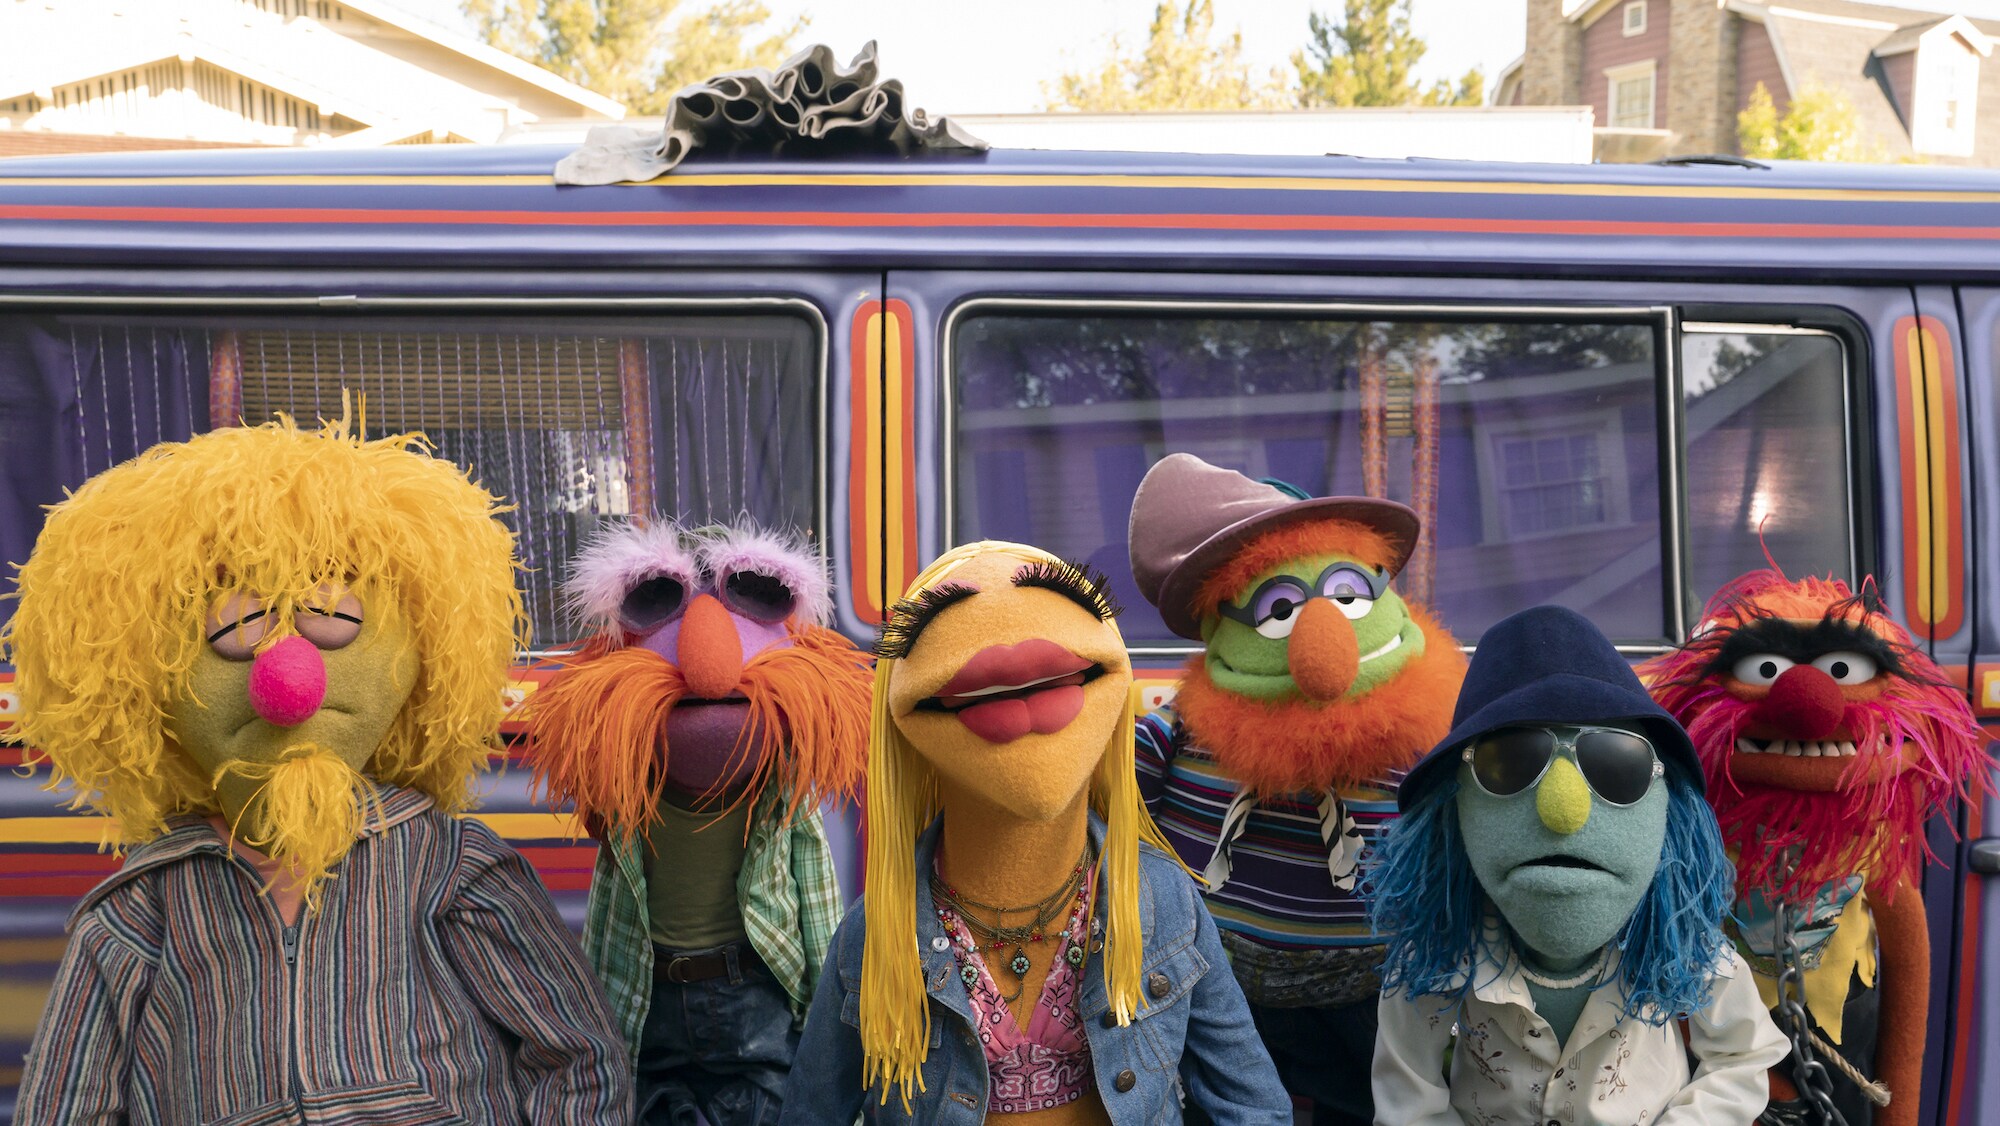 THE MUPPETS MAYHEM -  “Track 1: Can You Picture That?” (Disney/Mitch Haaseth) LIPS, FLOYD PEPPER, JANICE, DR. TEETH, ZOOT, ANIMAL